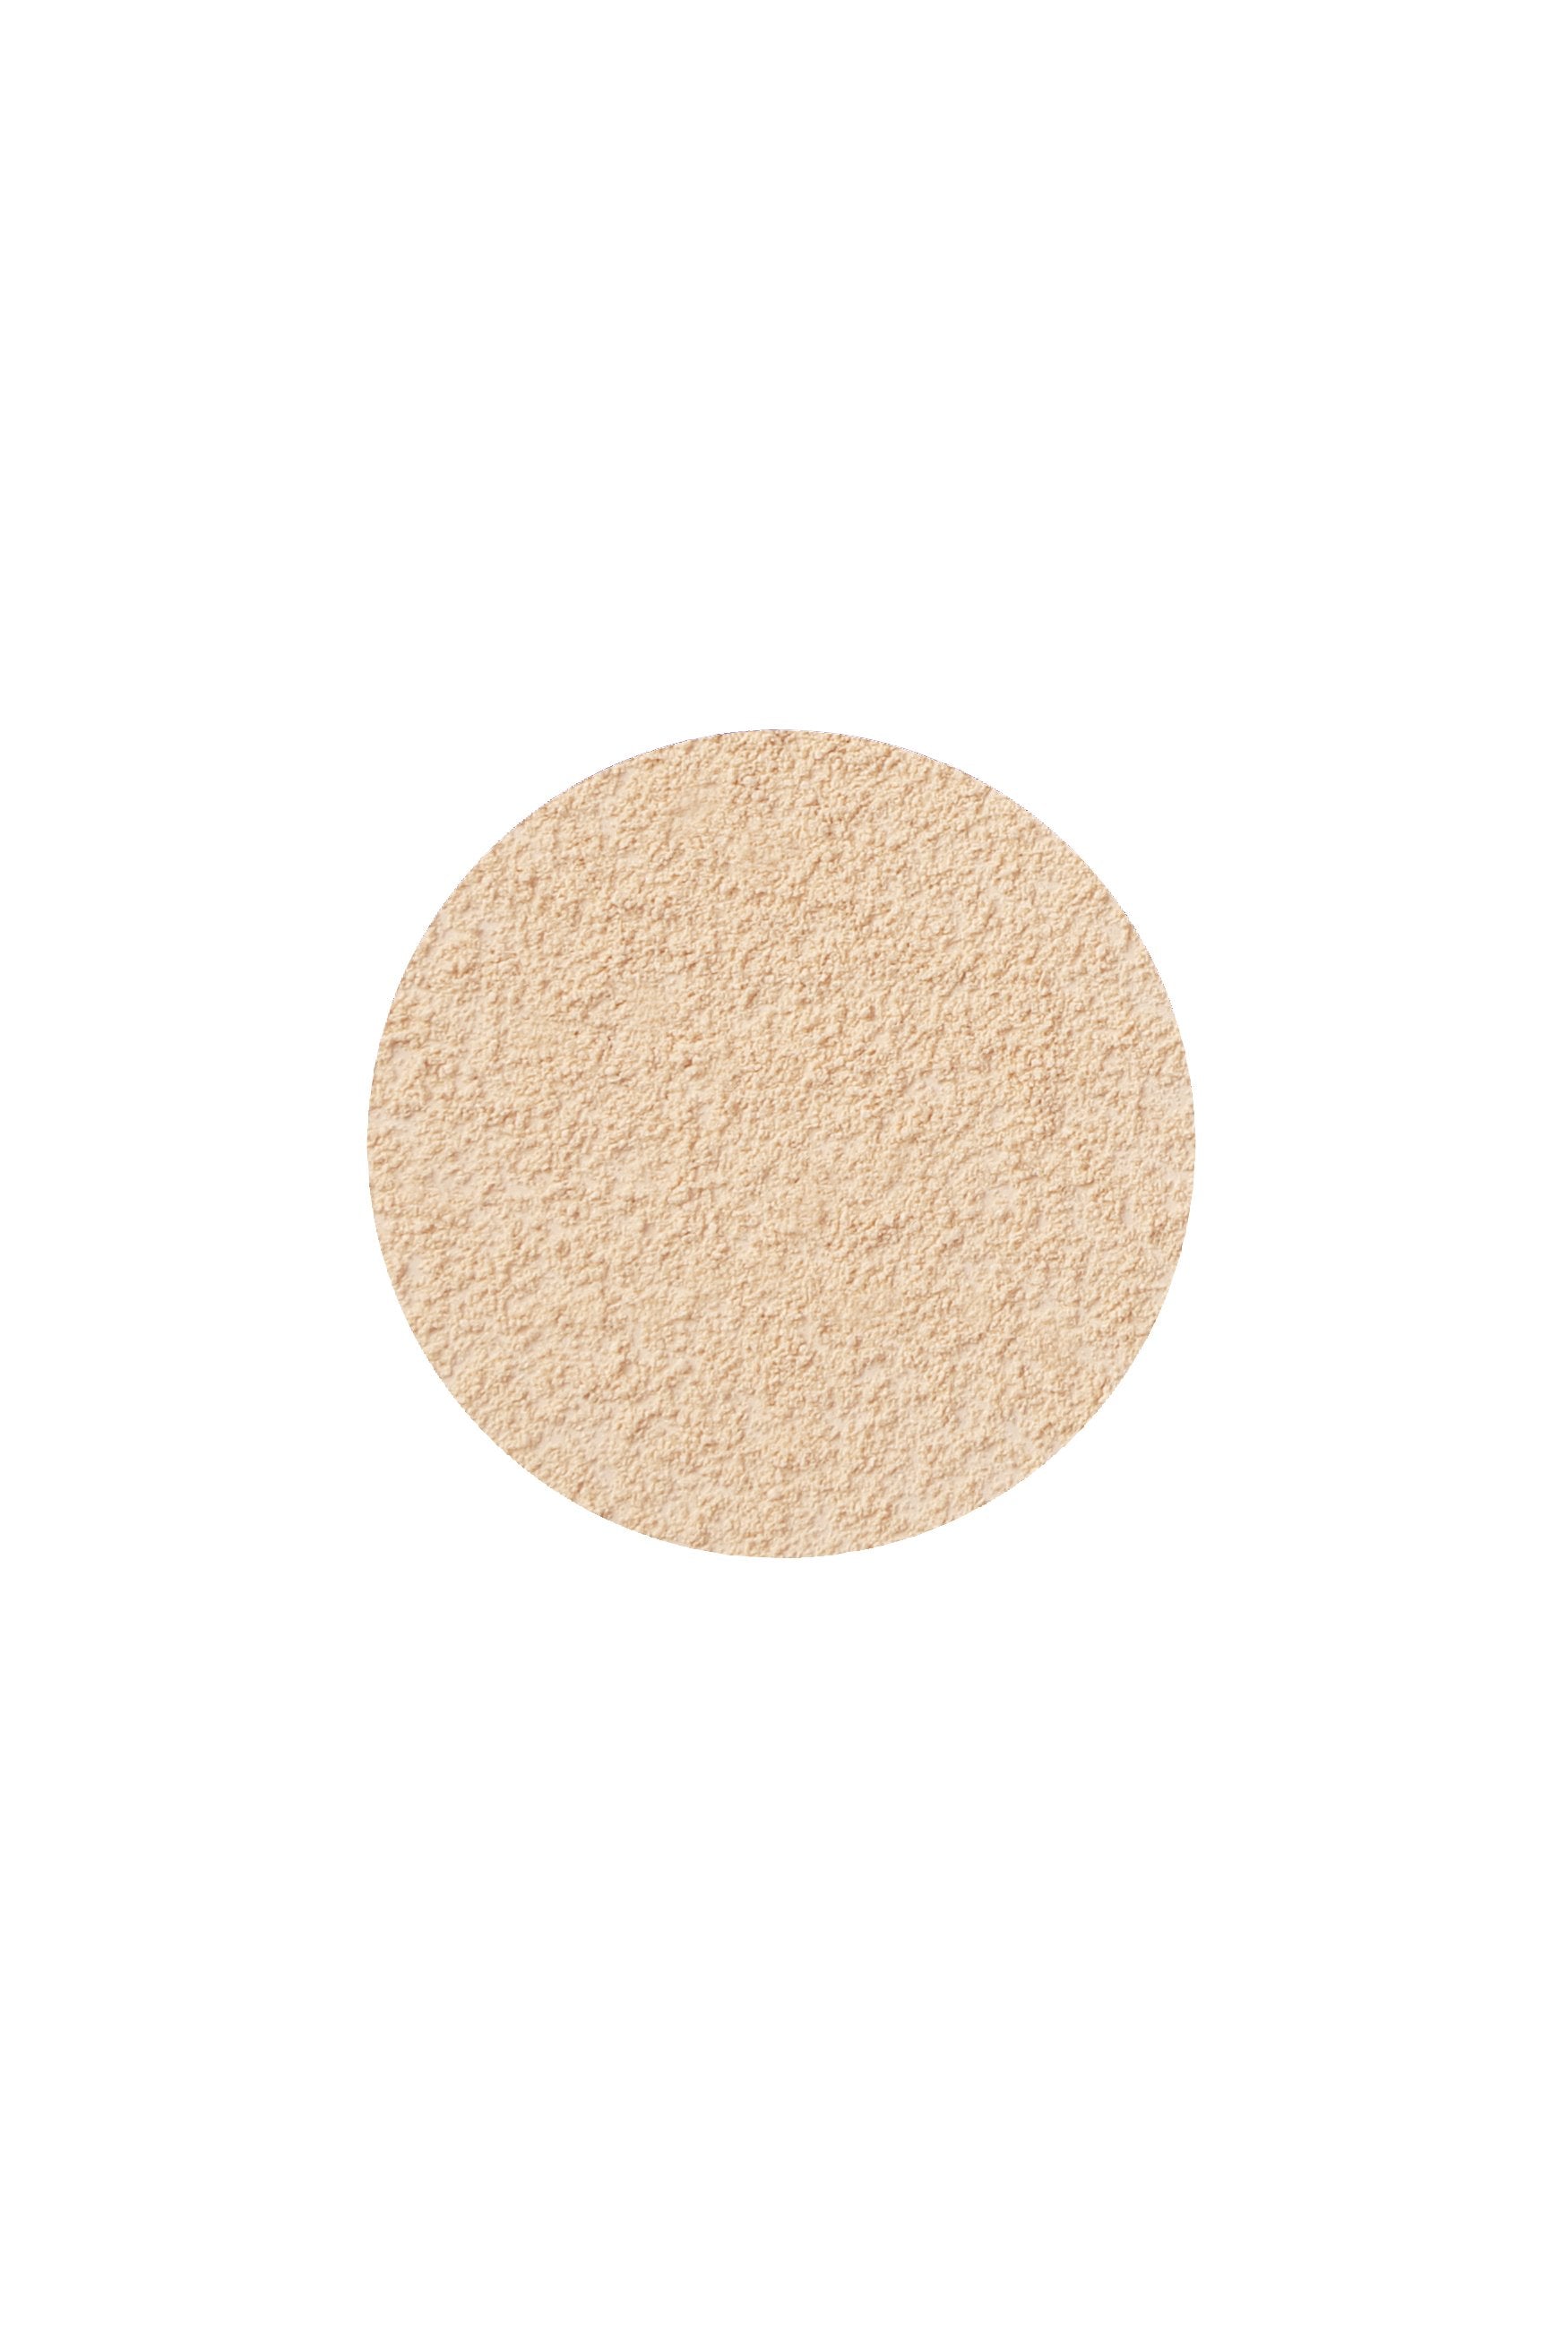  GOLD PEARL Loose Powder  (Large Refill Only) Provides a natural complexion with a glowing